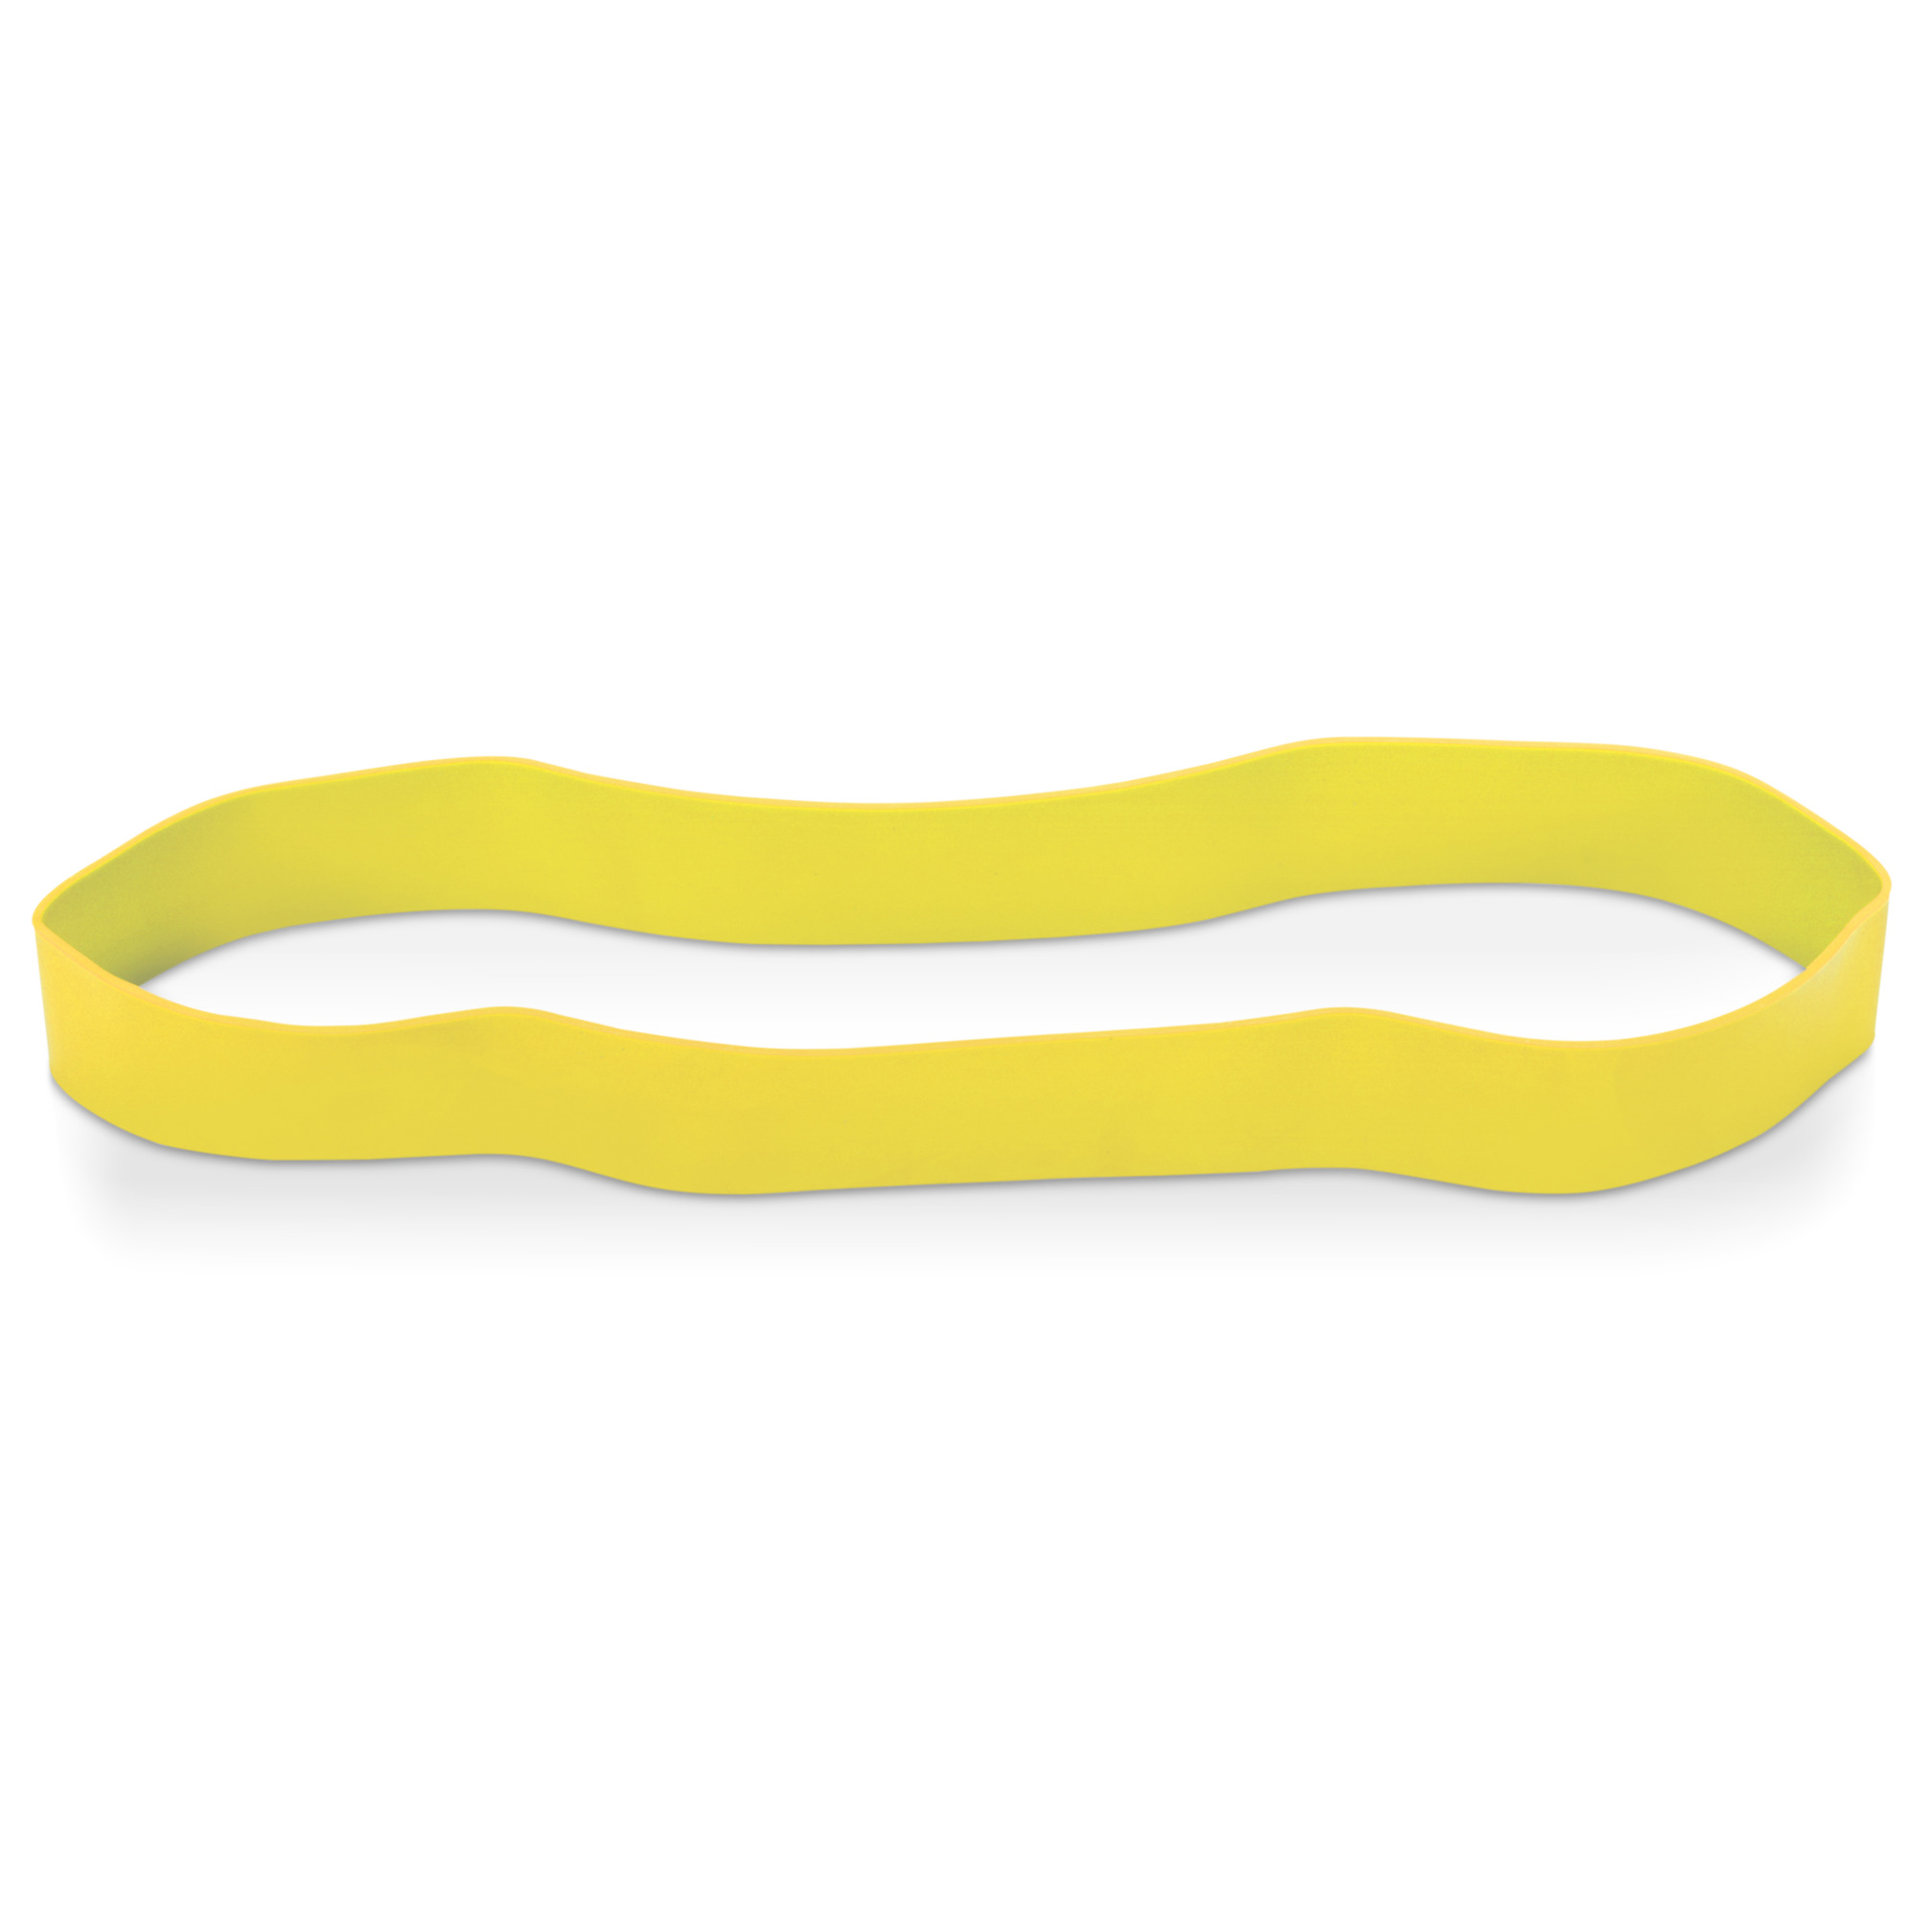 Fitness Loops resistance band, light